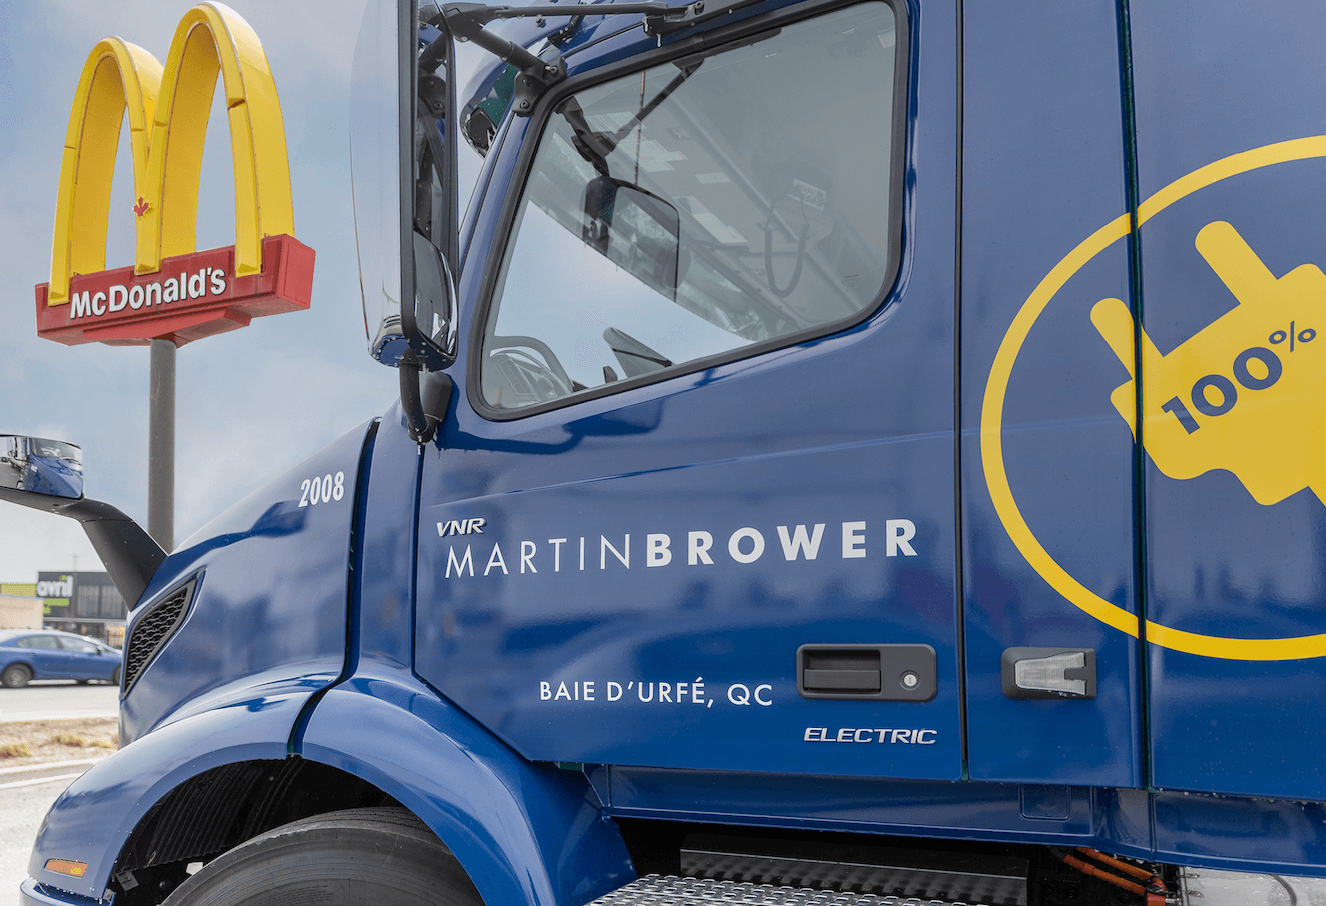 Martin Brower electric truck with McDonald's sign in the background